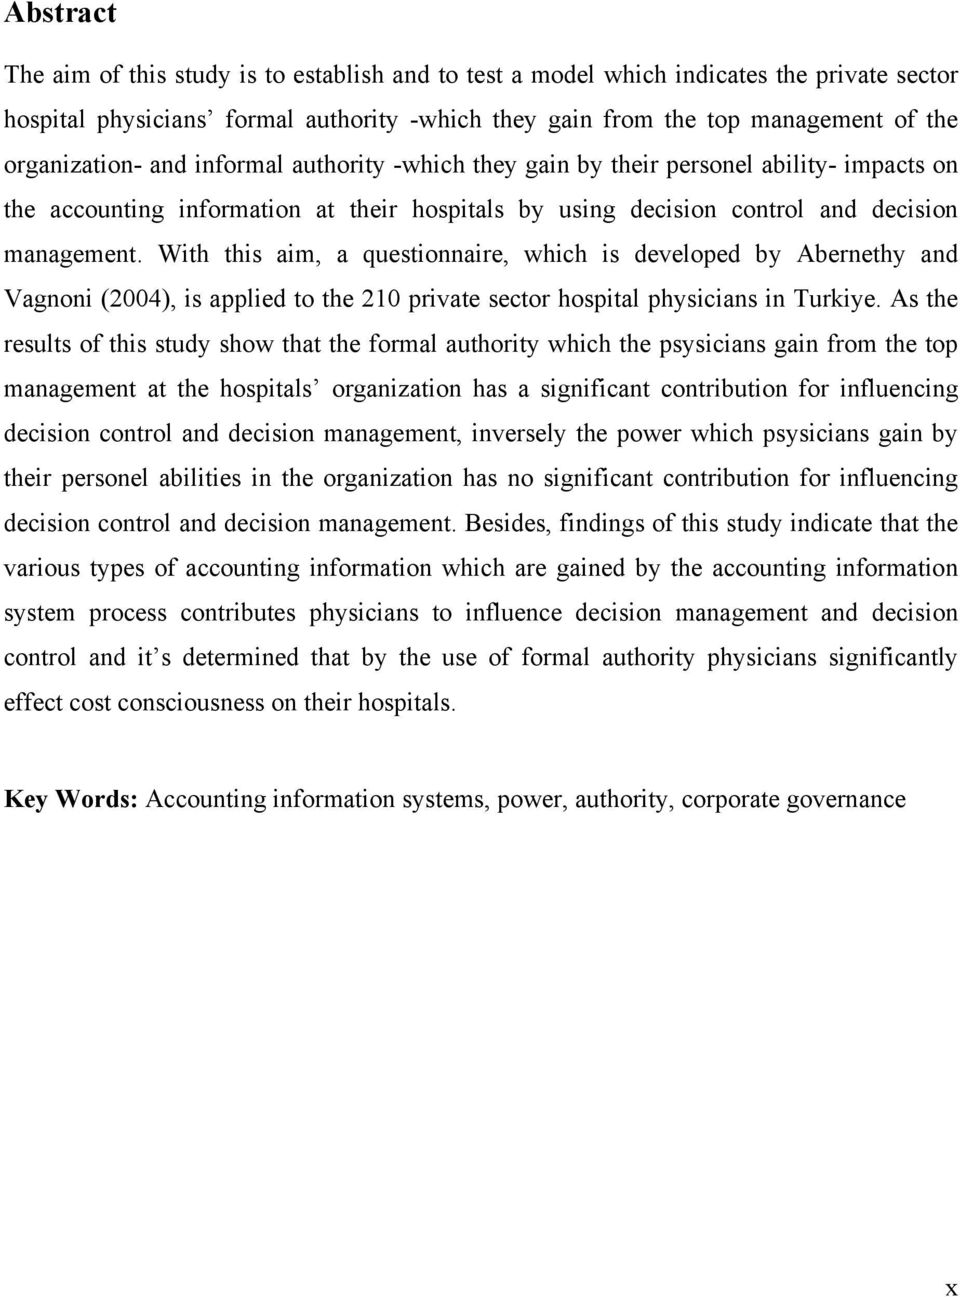 With this aim, a questionnaire, which is developed by Abernethy and Vagnoni (2004), is applied to the 210 private sector hospital physicians in Turkiye.